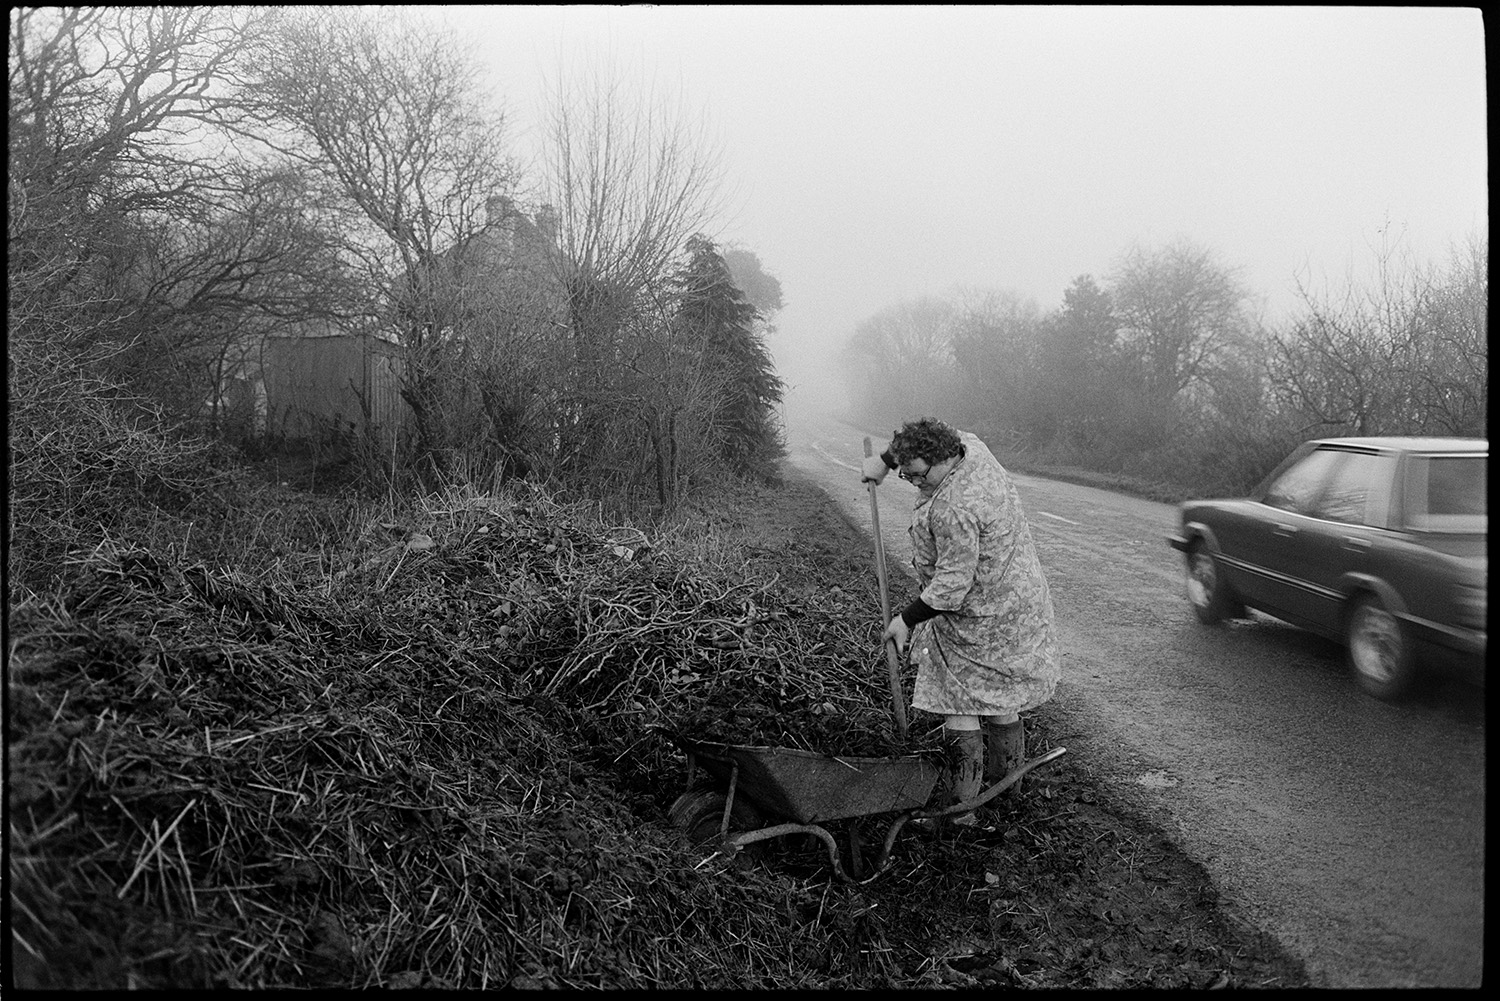 Woman farmer emptying manure from wheelbarrow onto muckheap.
[Olive Bennett unloading manure from a wheelbarrow onto a muck heap on the verge next to a road at Cuppers Piece, Beaford Moor. A car is passing by on the road.]